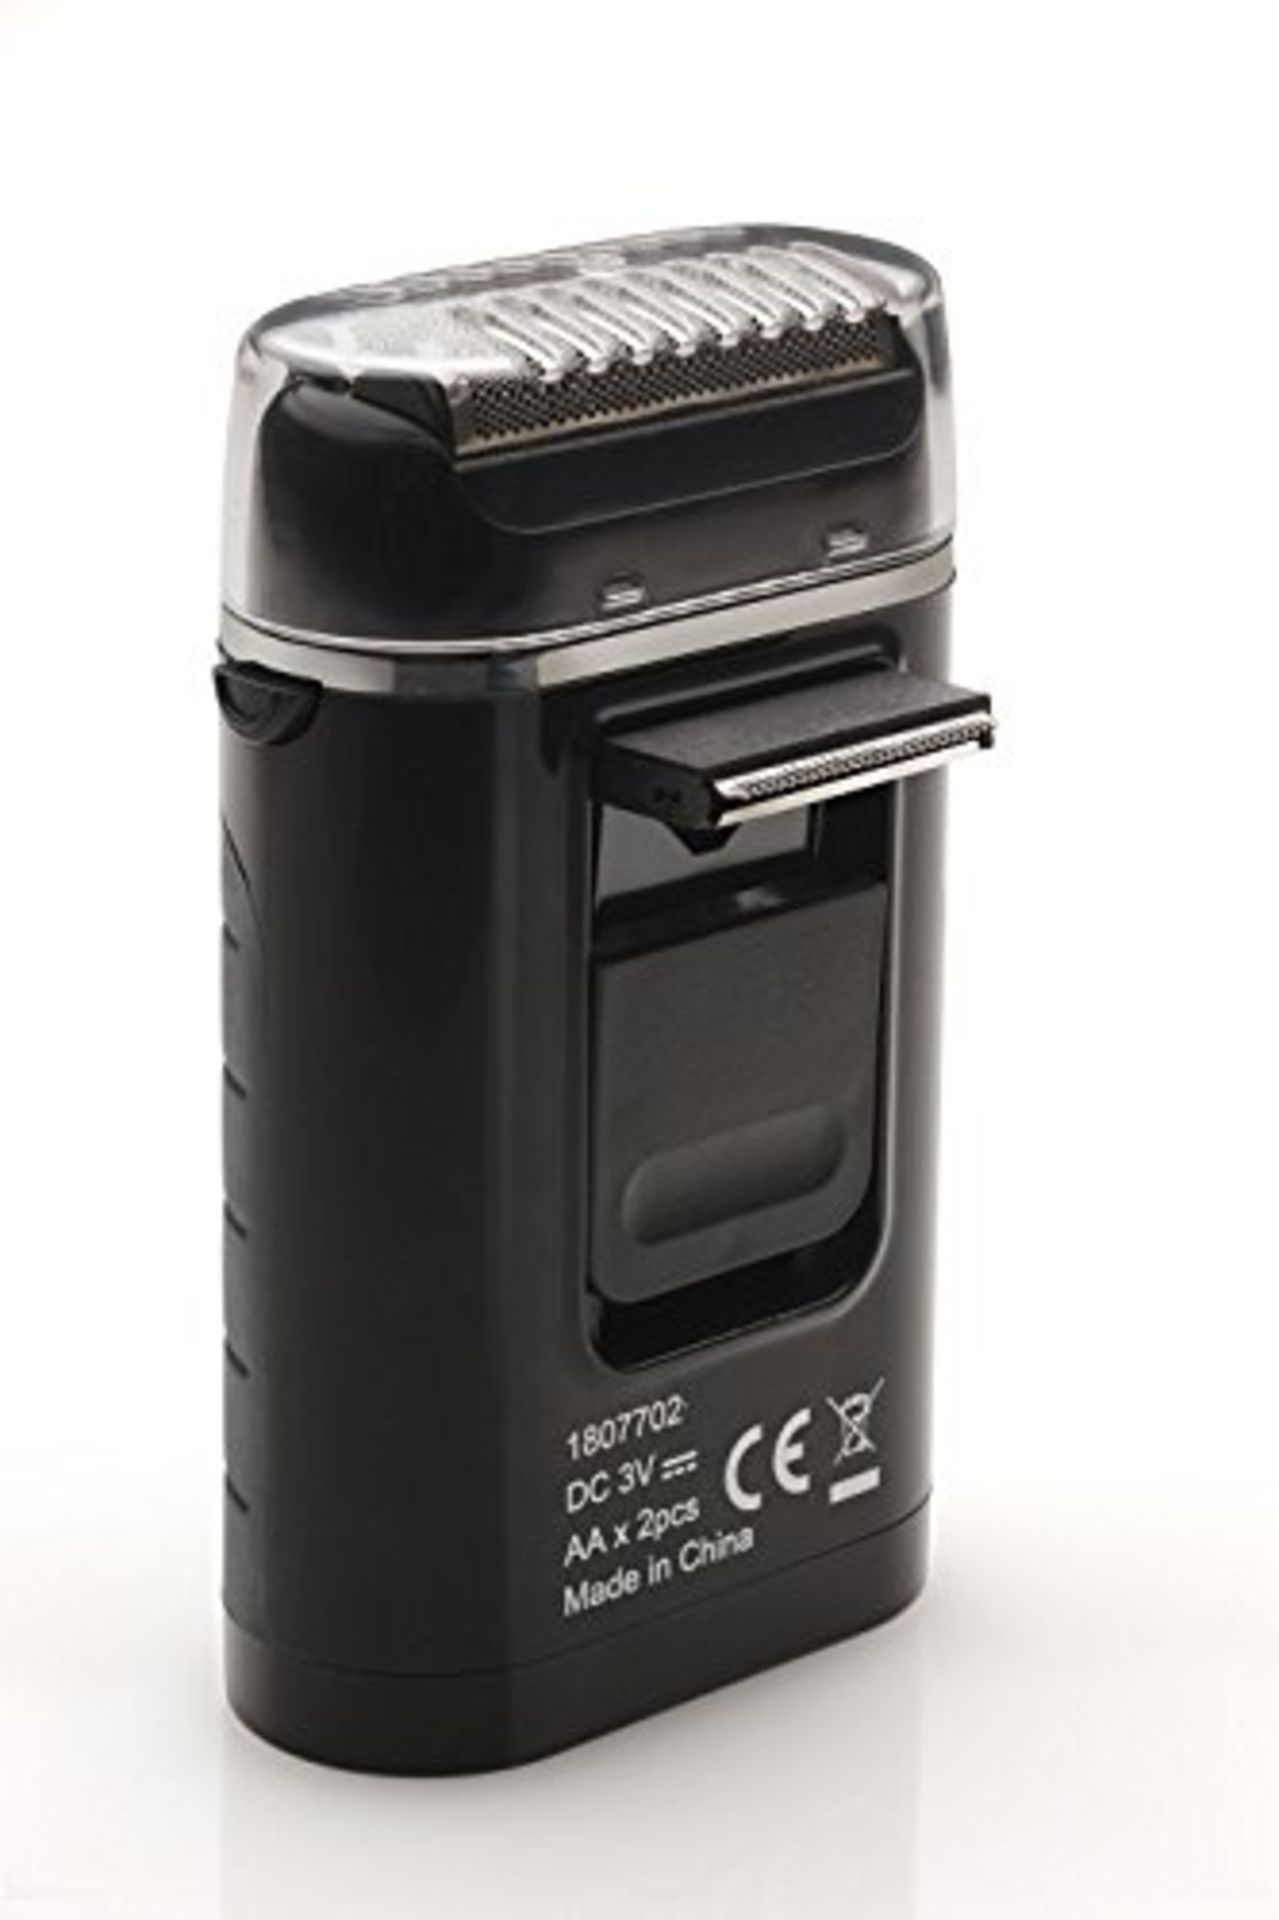 V *TRADE QTY* Brand New Carrera Electric Gents Shaver X 5 YOUR BID PRICE TO BE MULTIPLIED BY FIVE